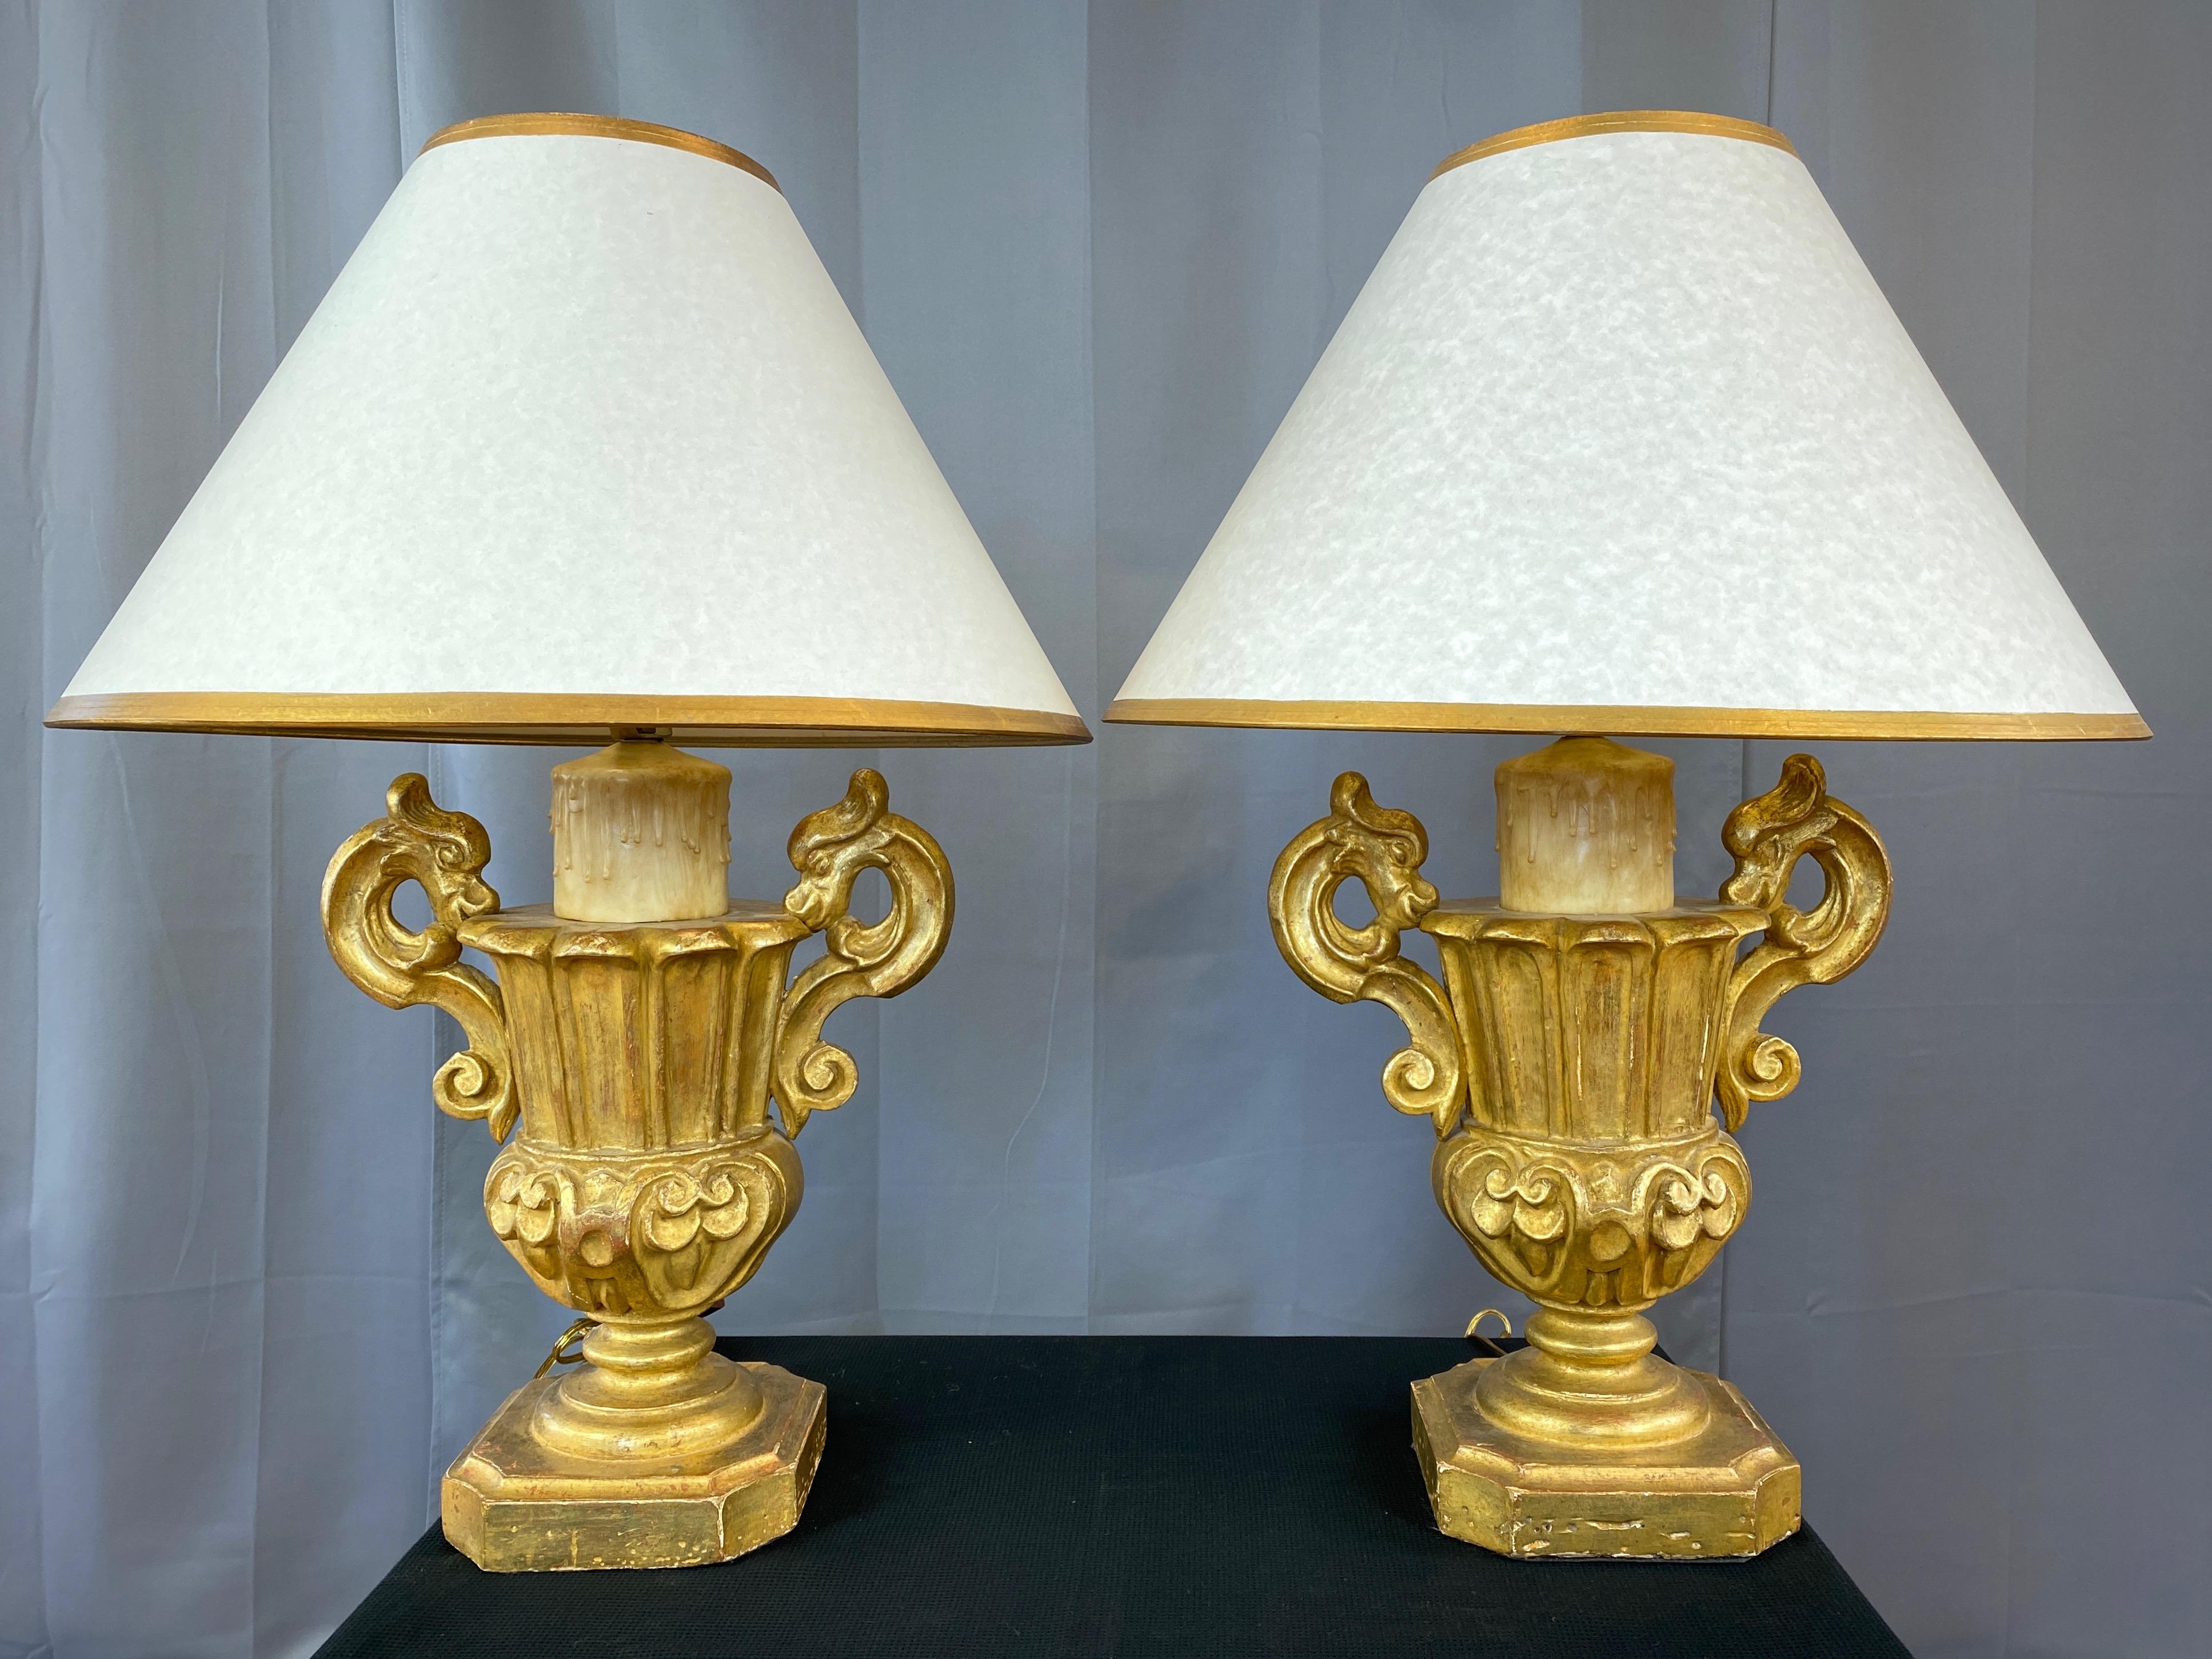 A dramatic and commanding pair of 1930s Italian Baroque Revival giltwood urn form table lamps with faux candle topper and custom shade.

Exquisitely carved wood body distinguished by elegant stylized serpent handles and deep-relief details